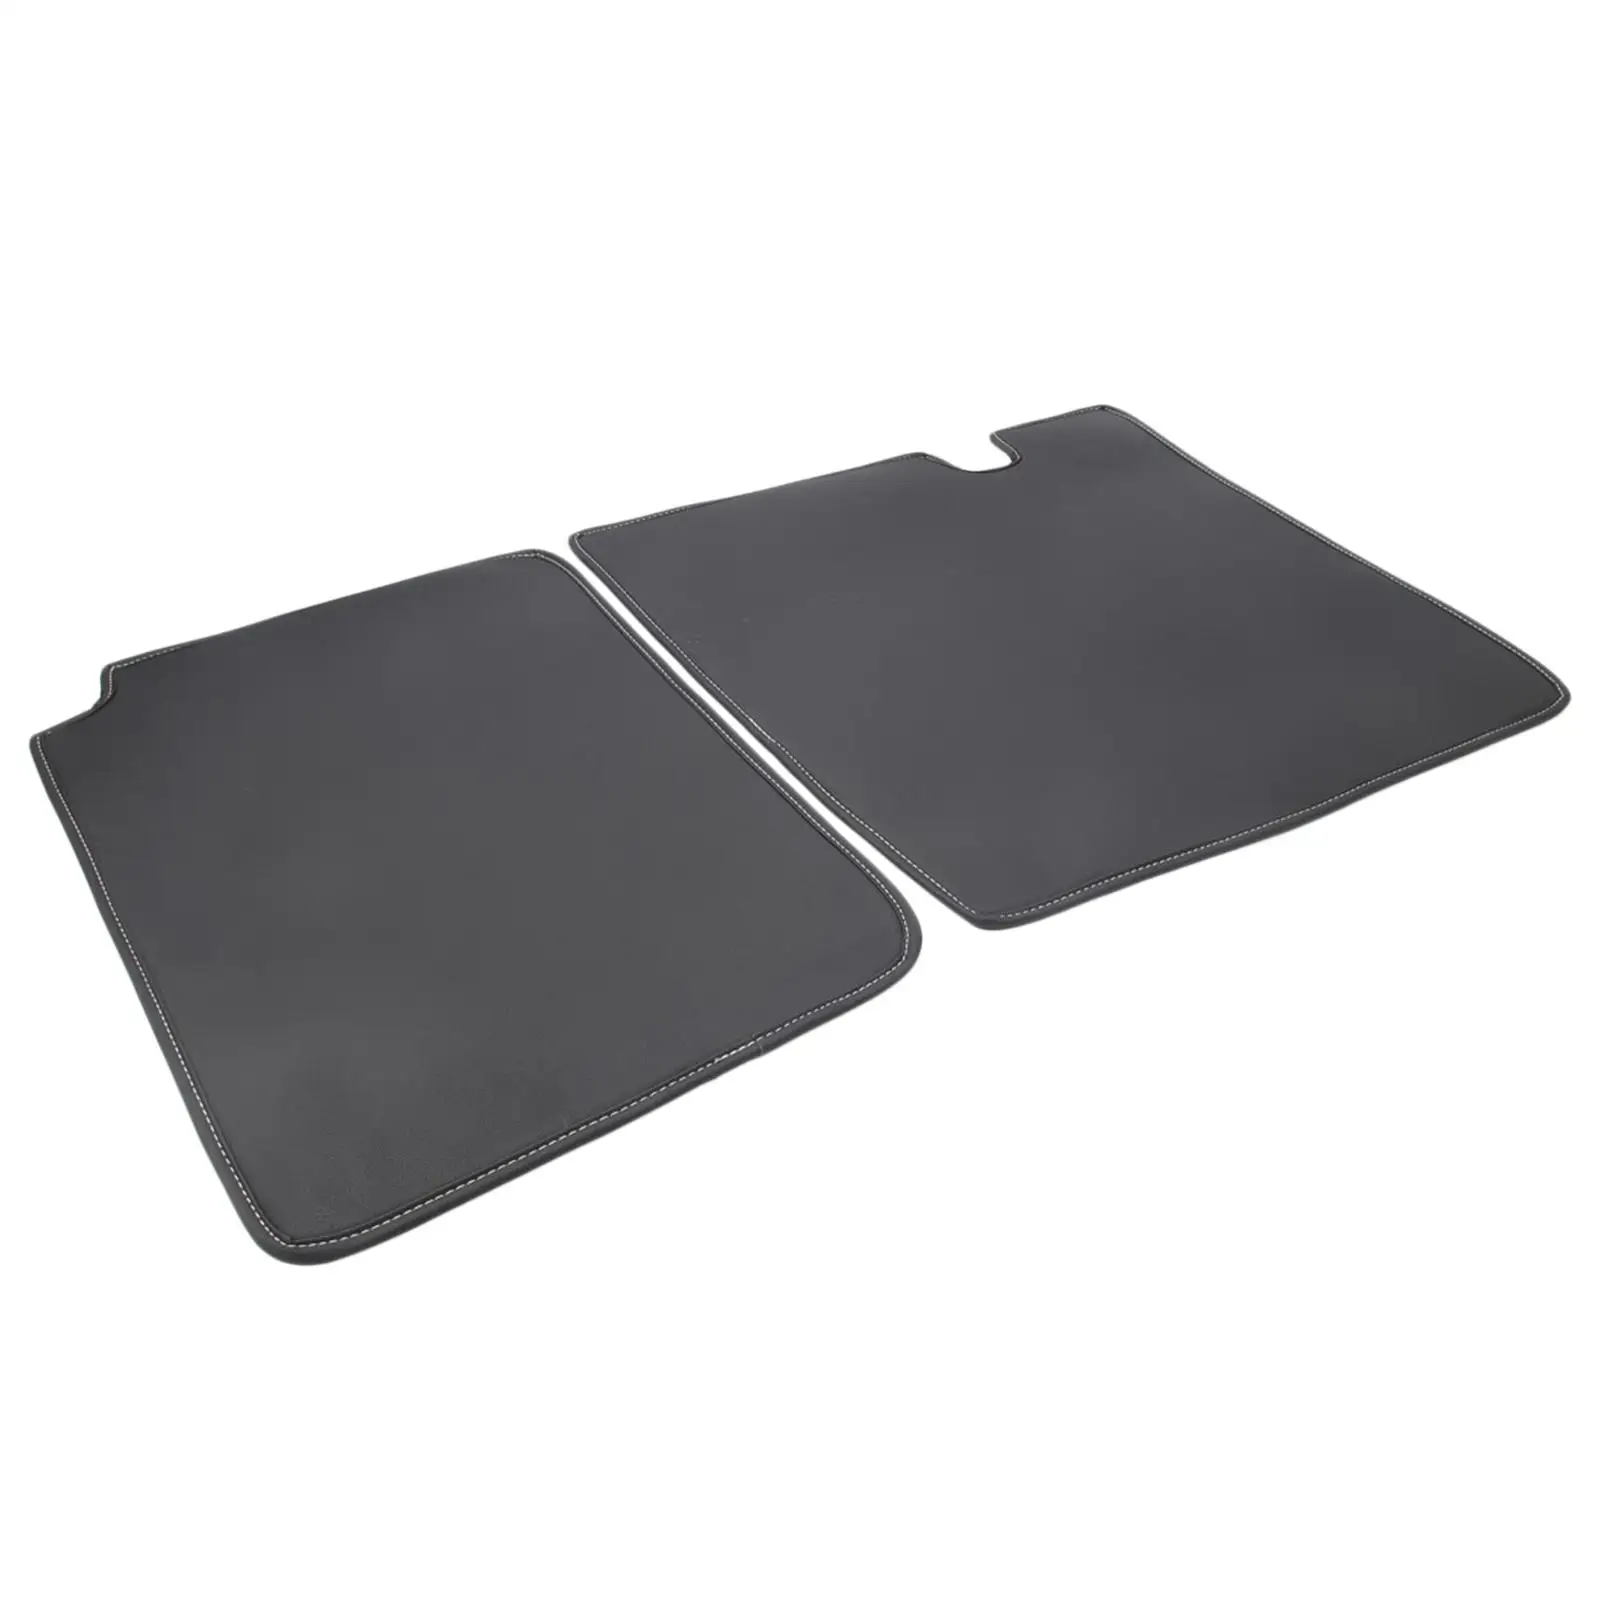 Leather Rear Seat Pad Protective Cushions Fits for  Model Y  Pad